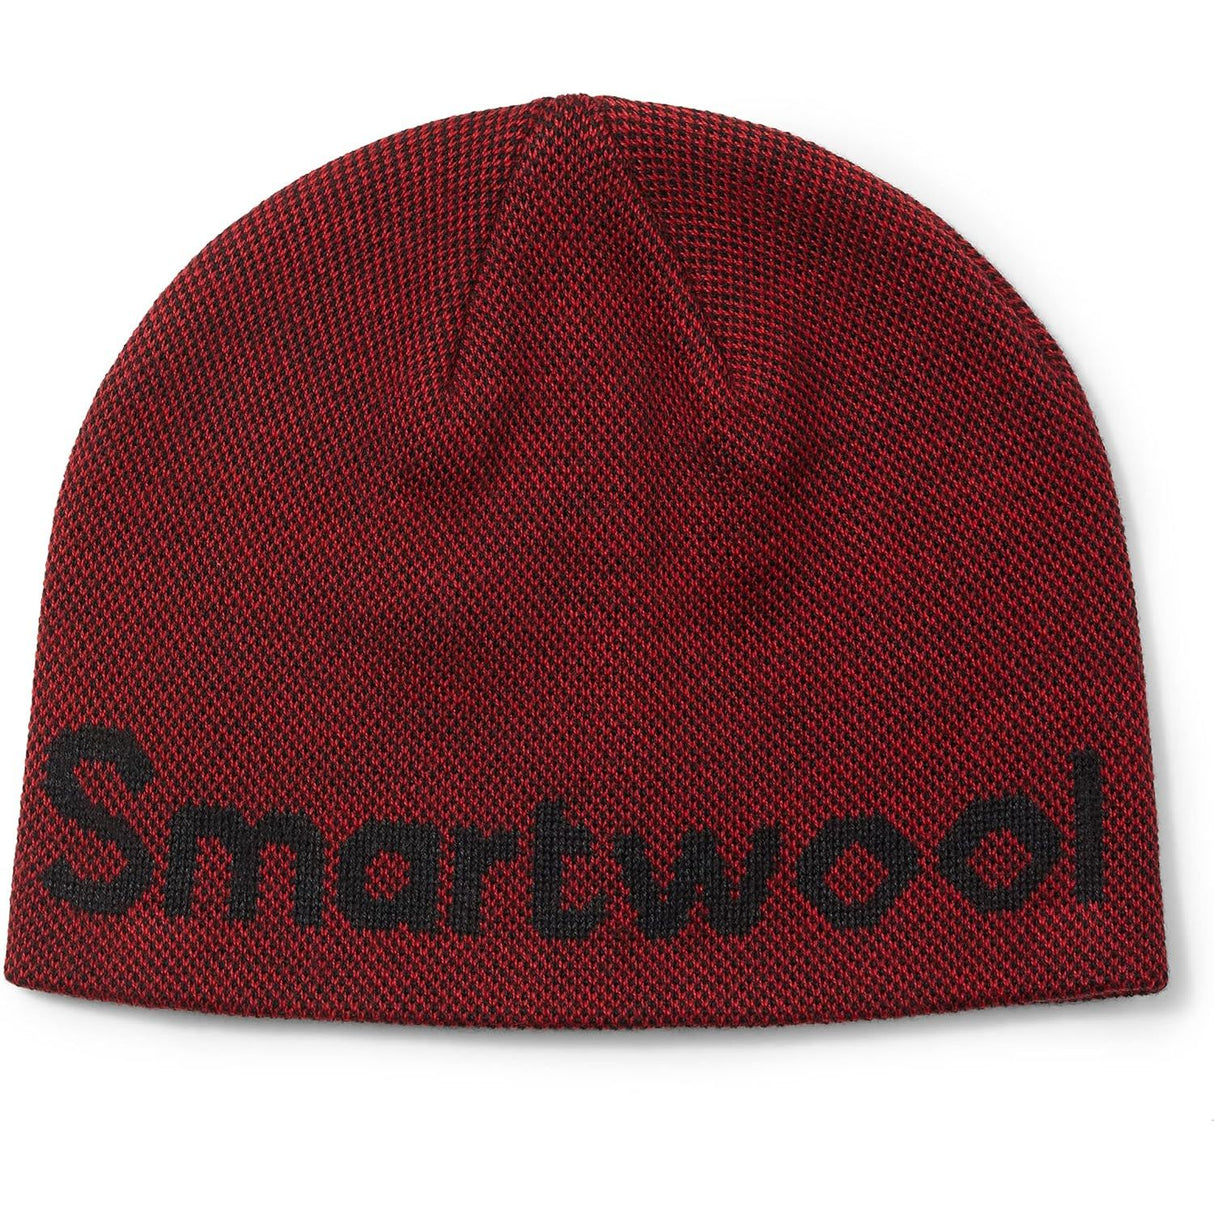 Smartwool Lid Logo Beanie  -  One Size Fits Most / Rhythmic Red